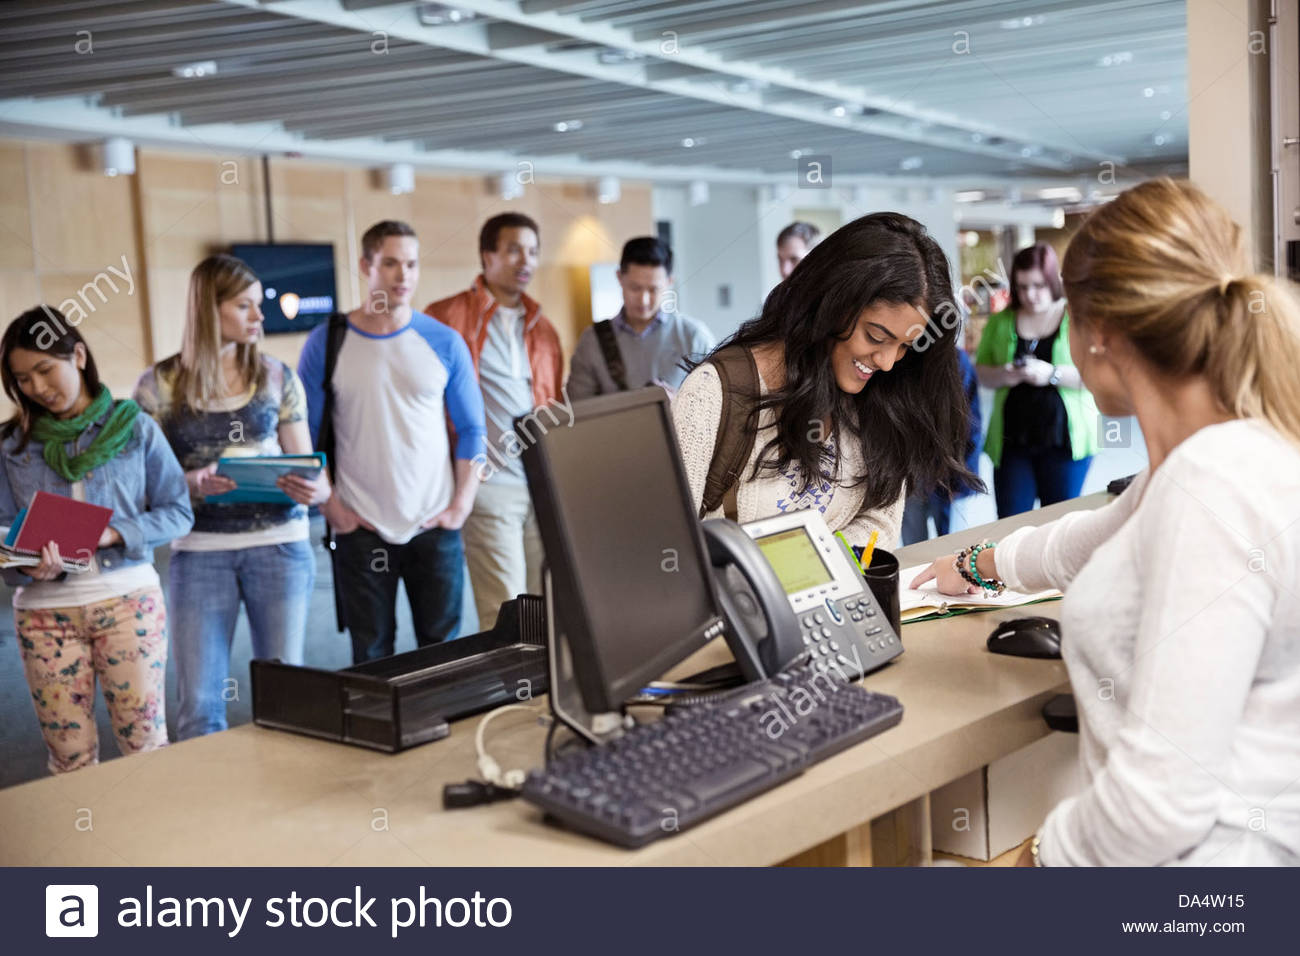 Young students registering for classes at college campus Stock Photo